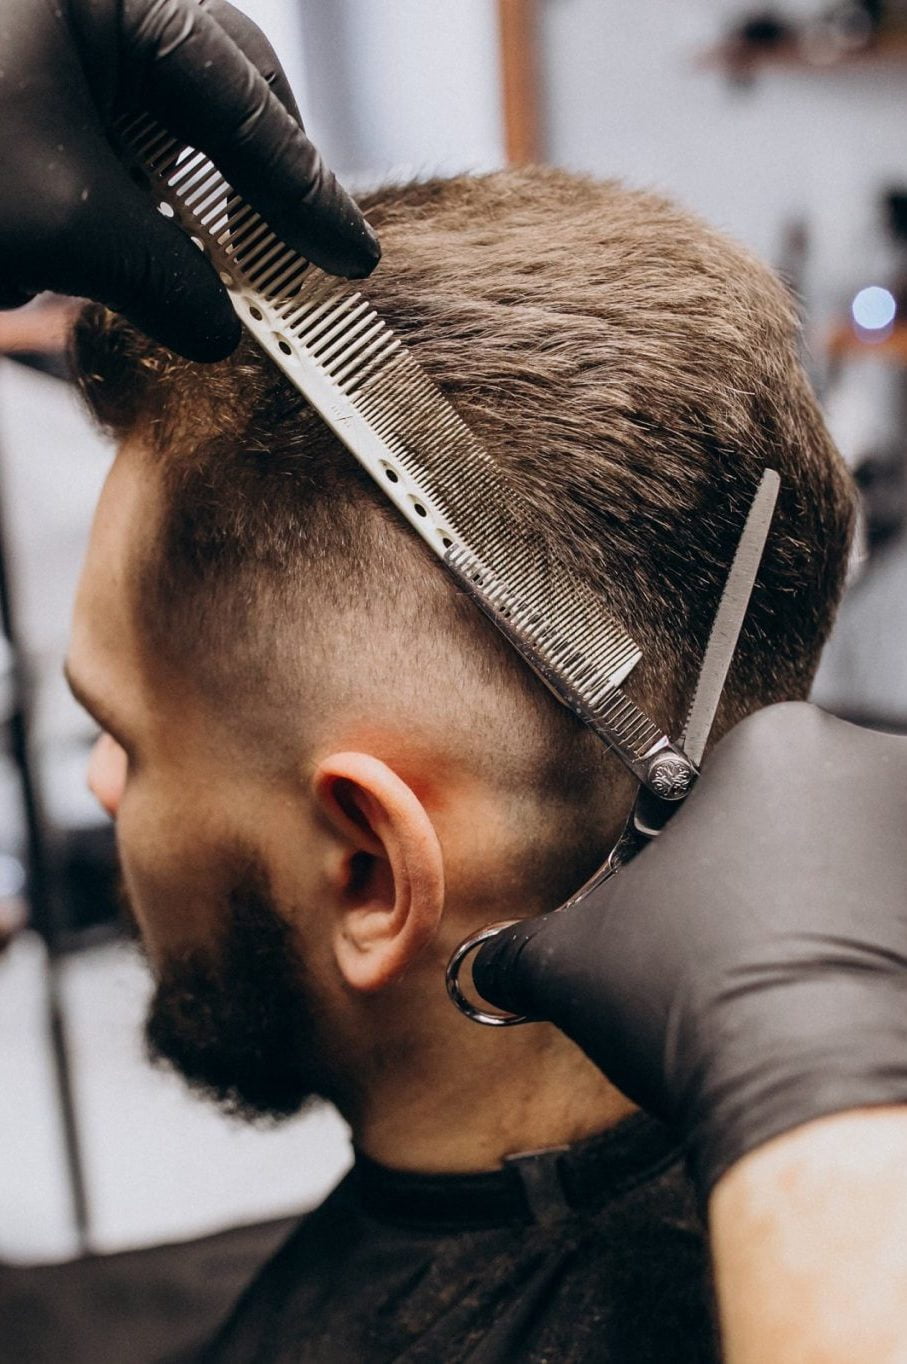 Taking on a new look at a barbershop